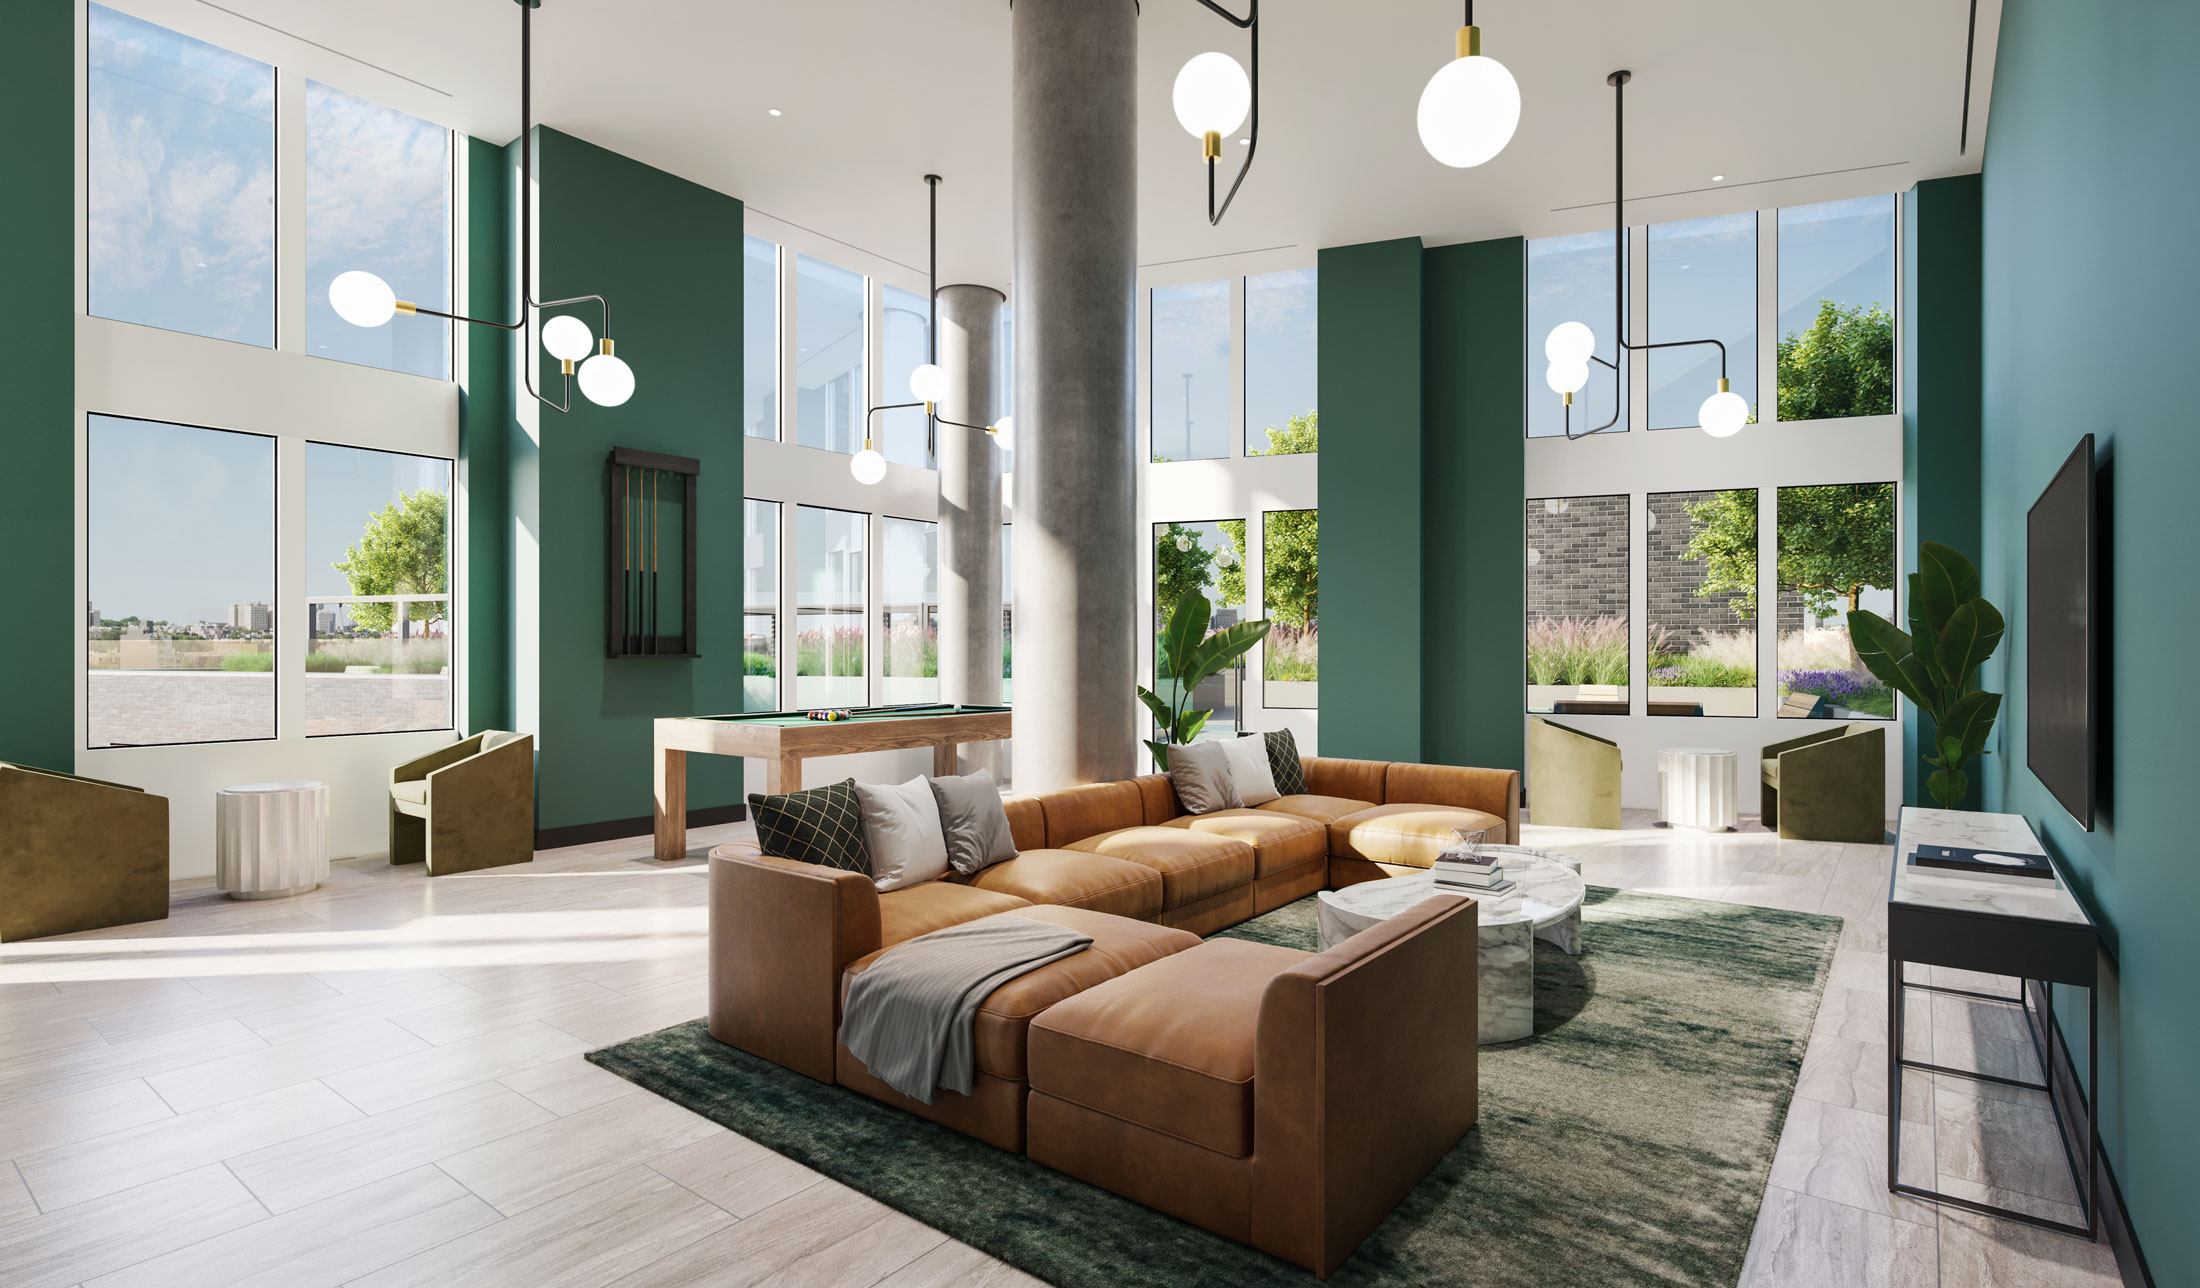 Architectural Rendering of the 10th floor lounge of the 595 Dean St project located in Brooklyn, New York